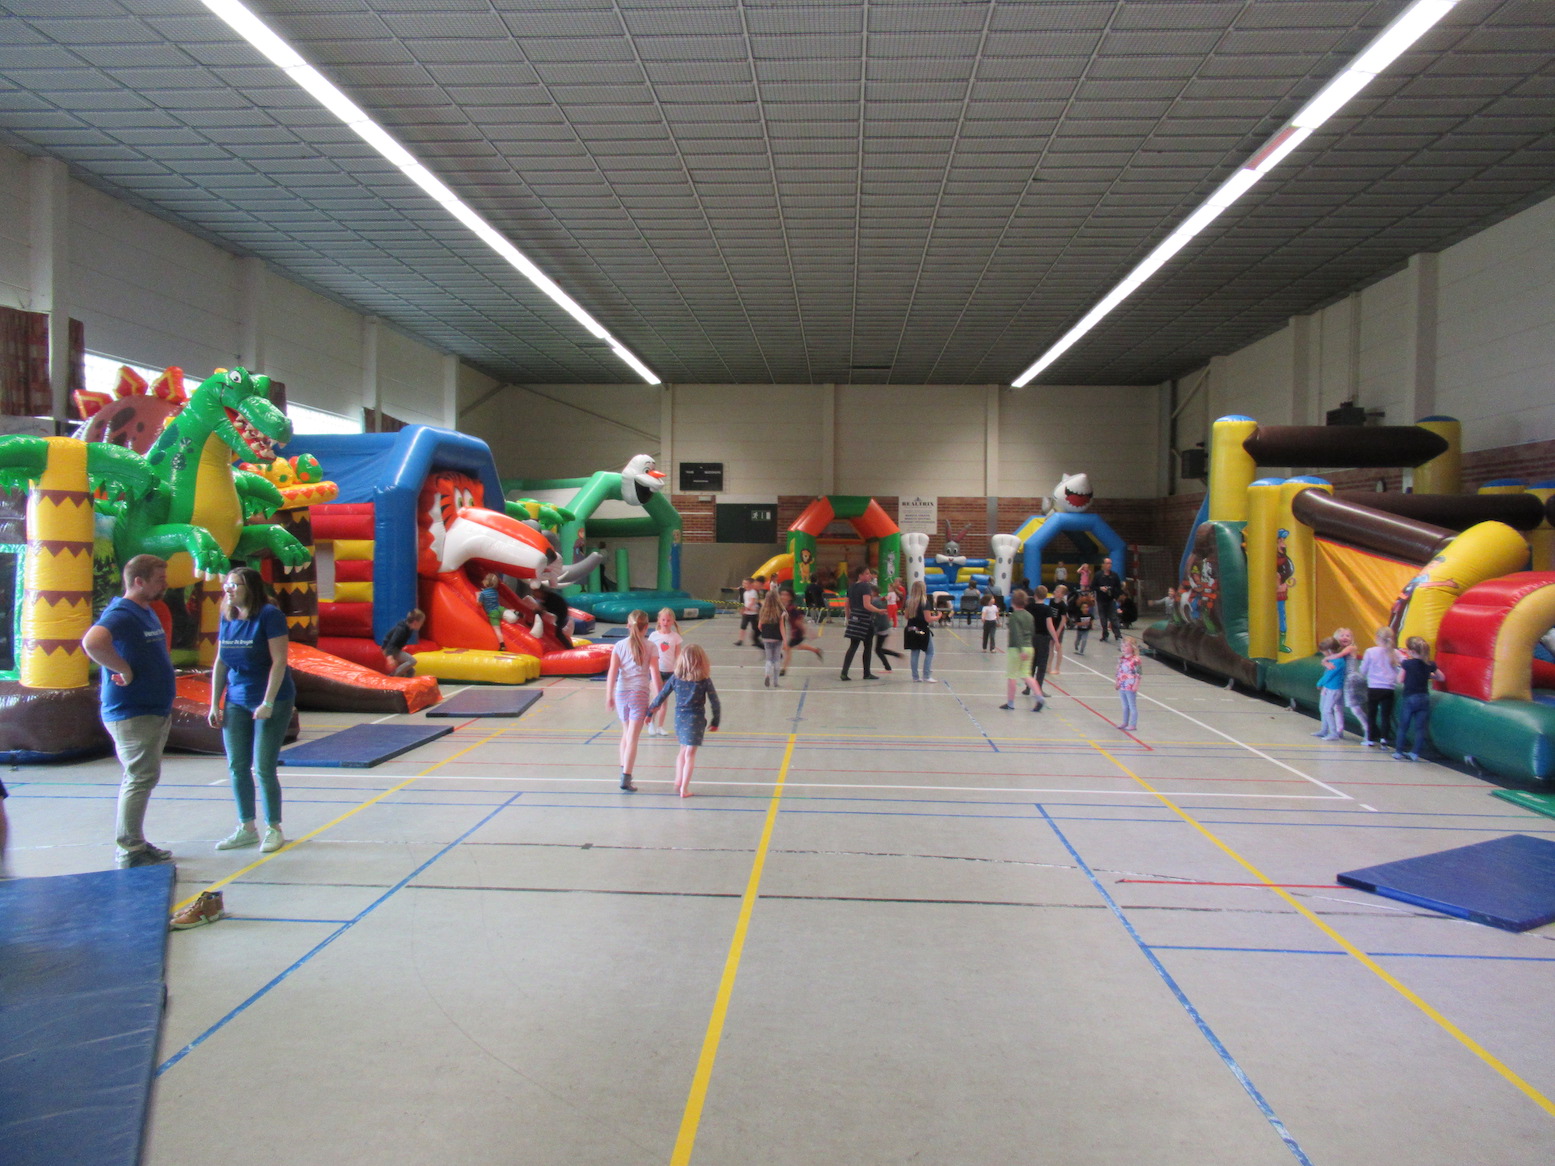 Bouncy castyle in a Gym hall